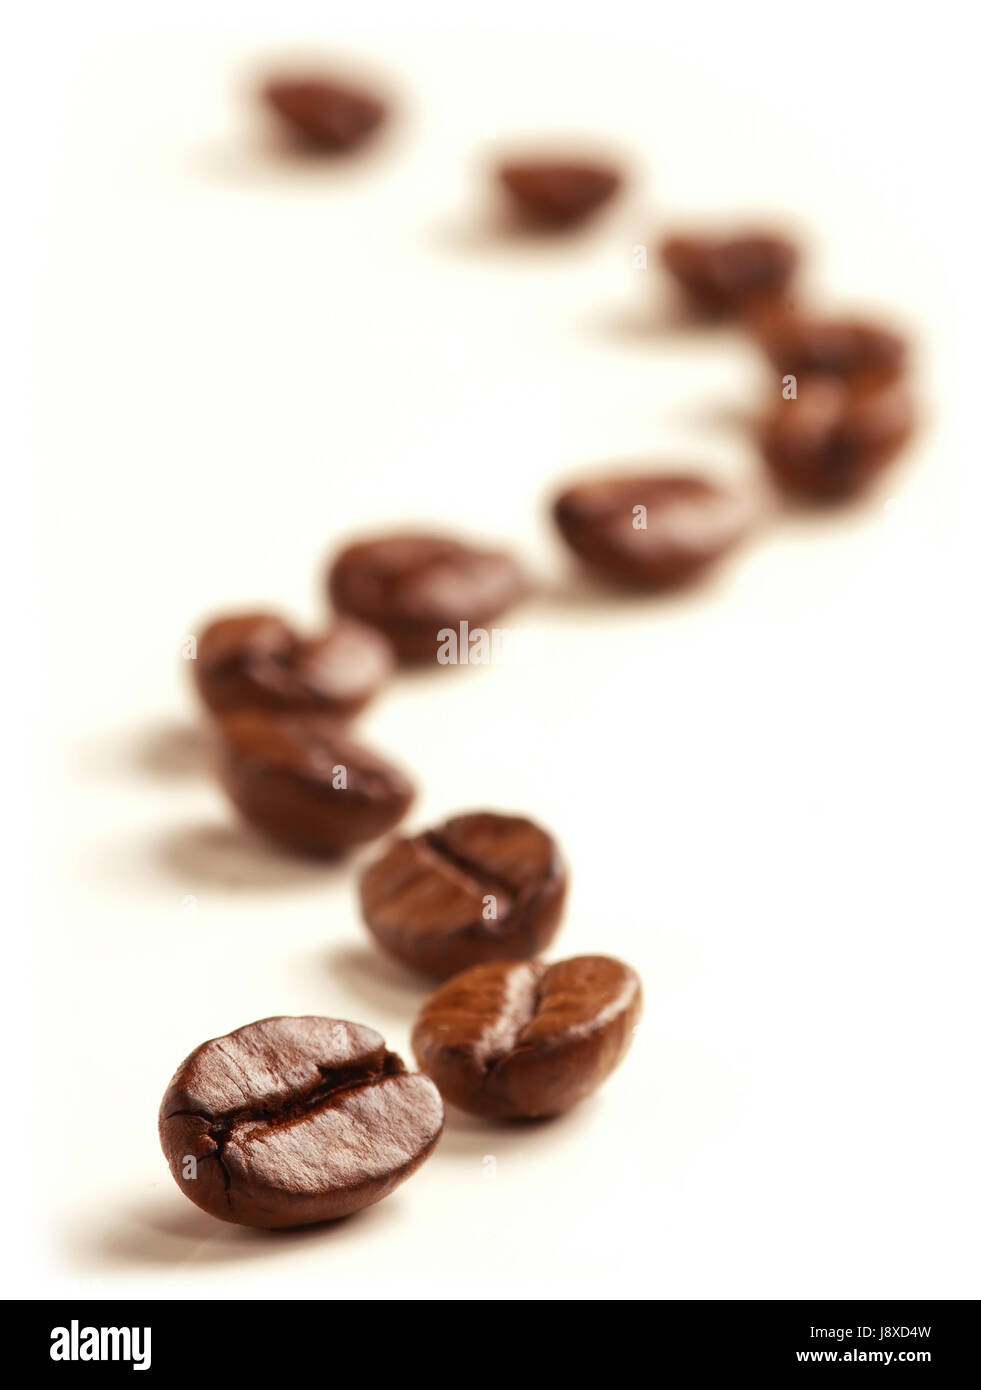 caffeine, zigzag, bean, coffee, white, cafe, food, aliment, health, isolated, Stock Photo